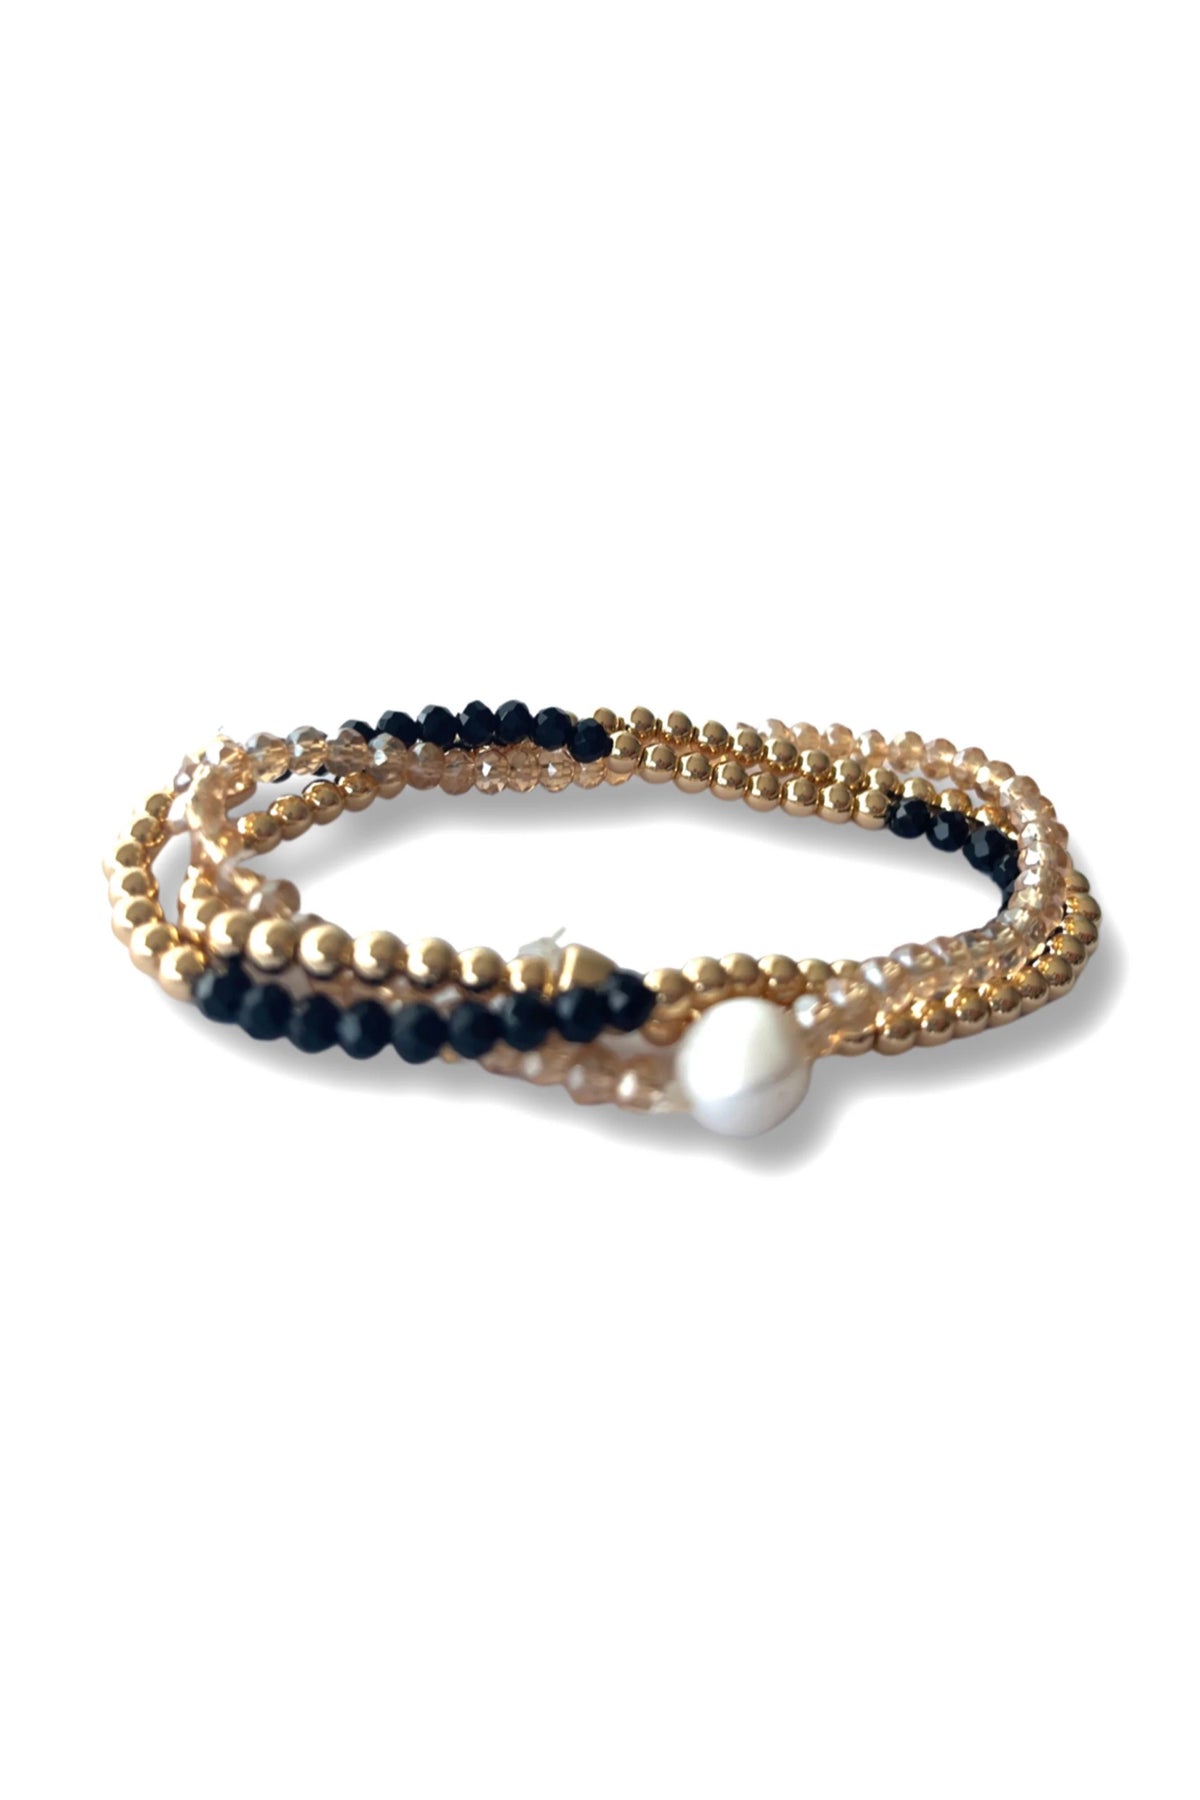 Champagne Pearl Black And Gold Beaded Bracelet Set